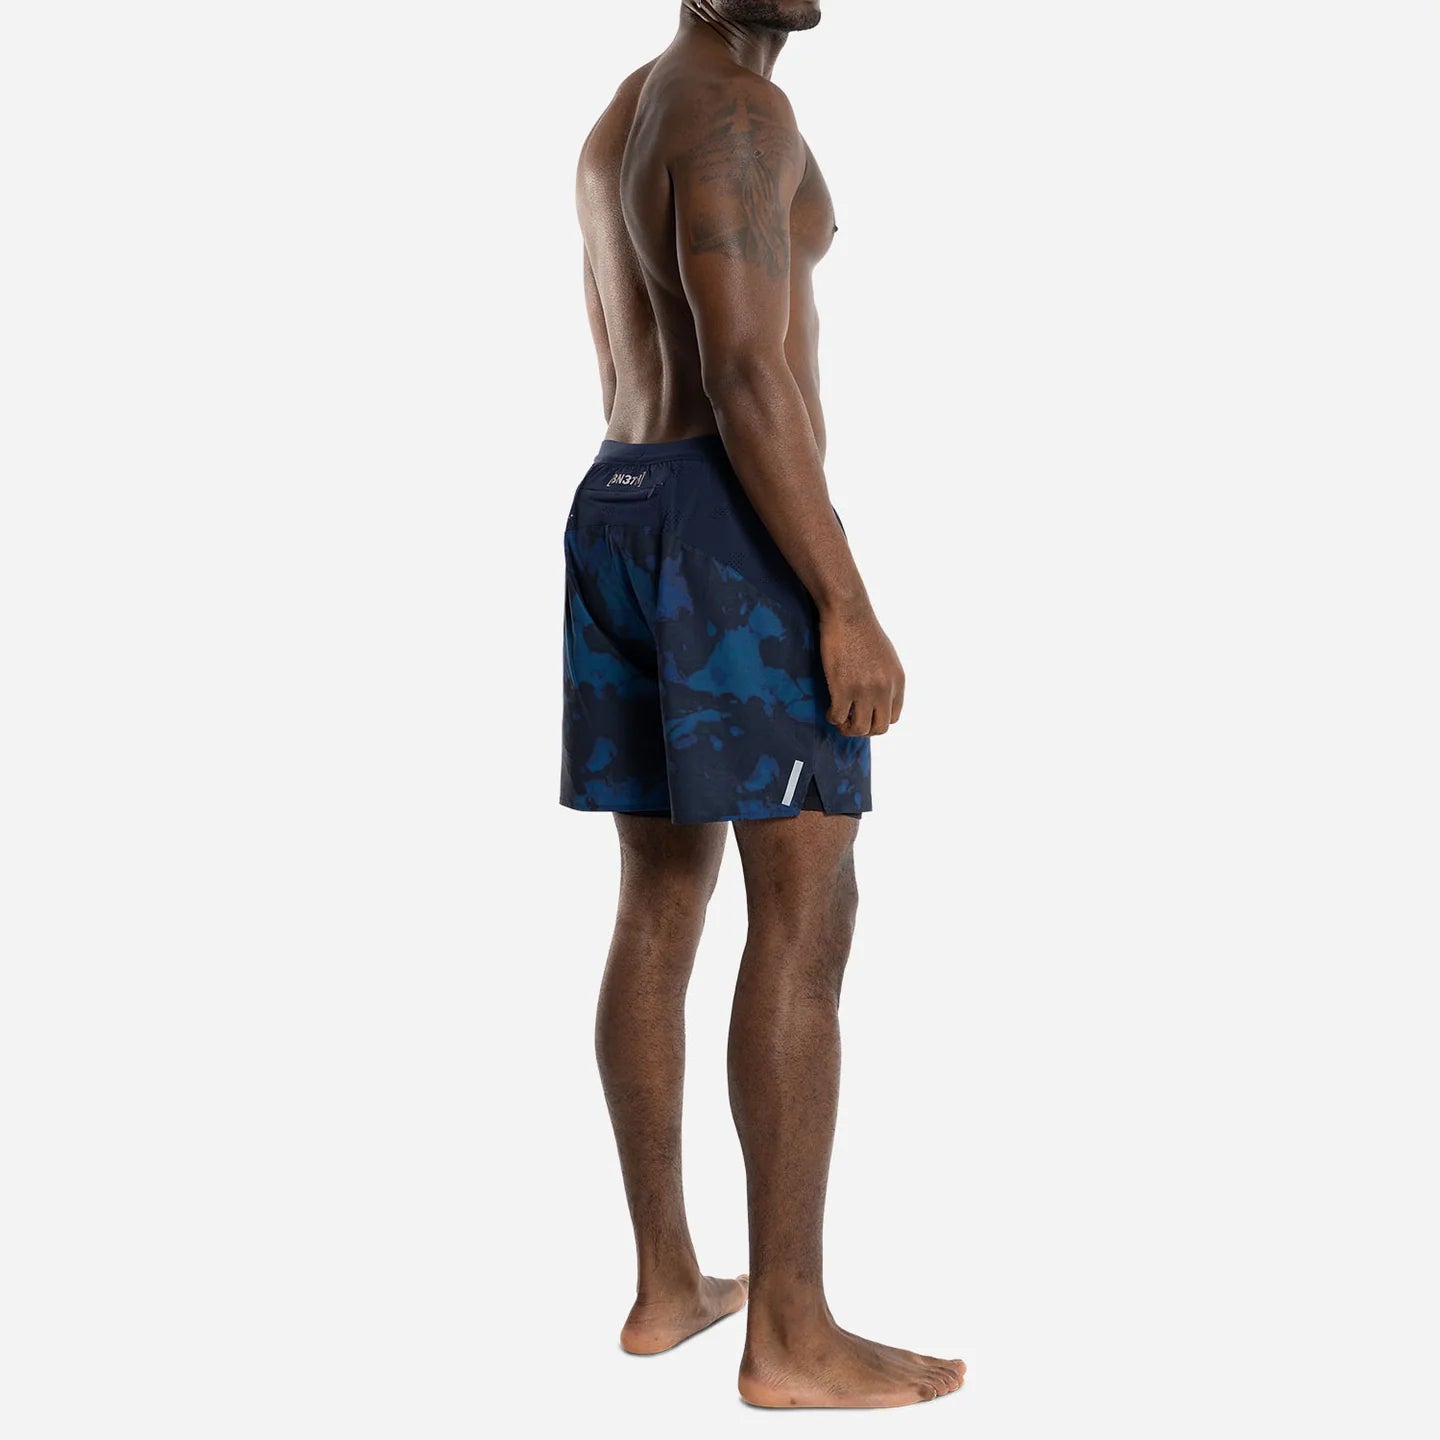 Short BN3TH RUNNERS HIGH SHORT WASHED OUT NAVY